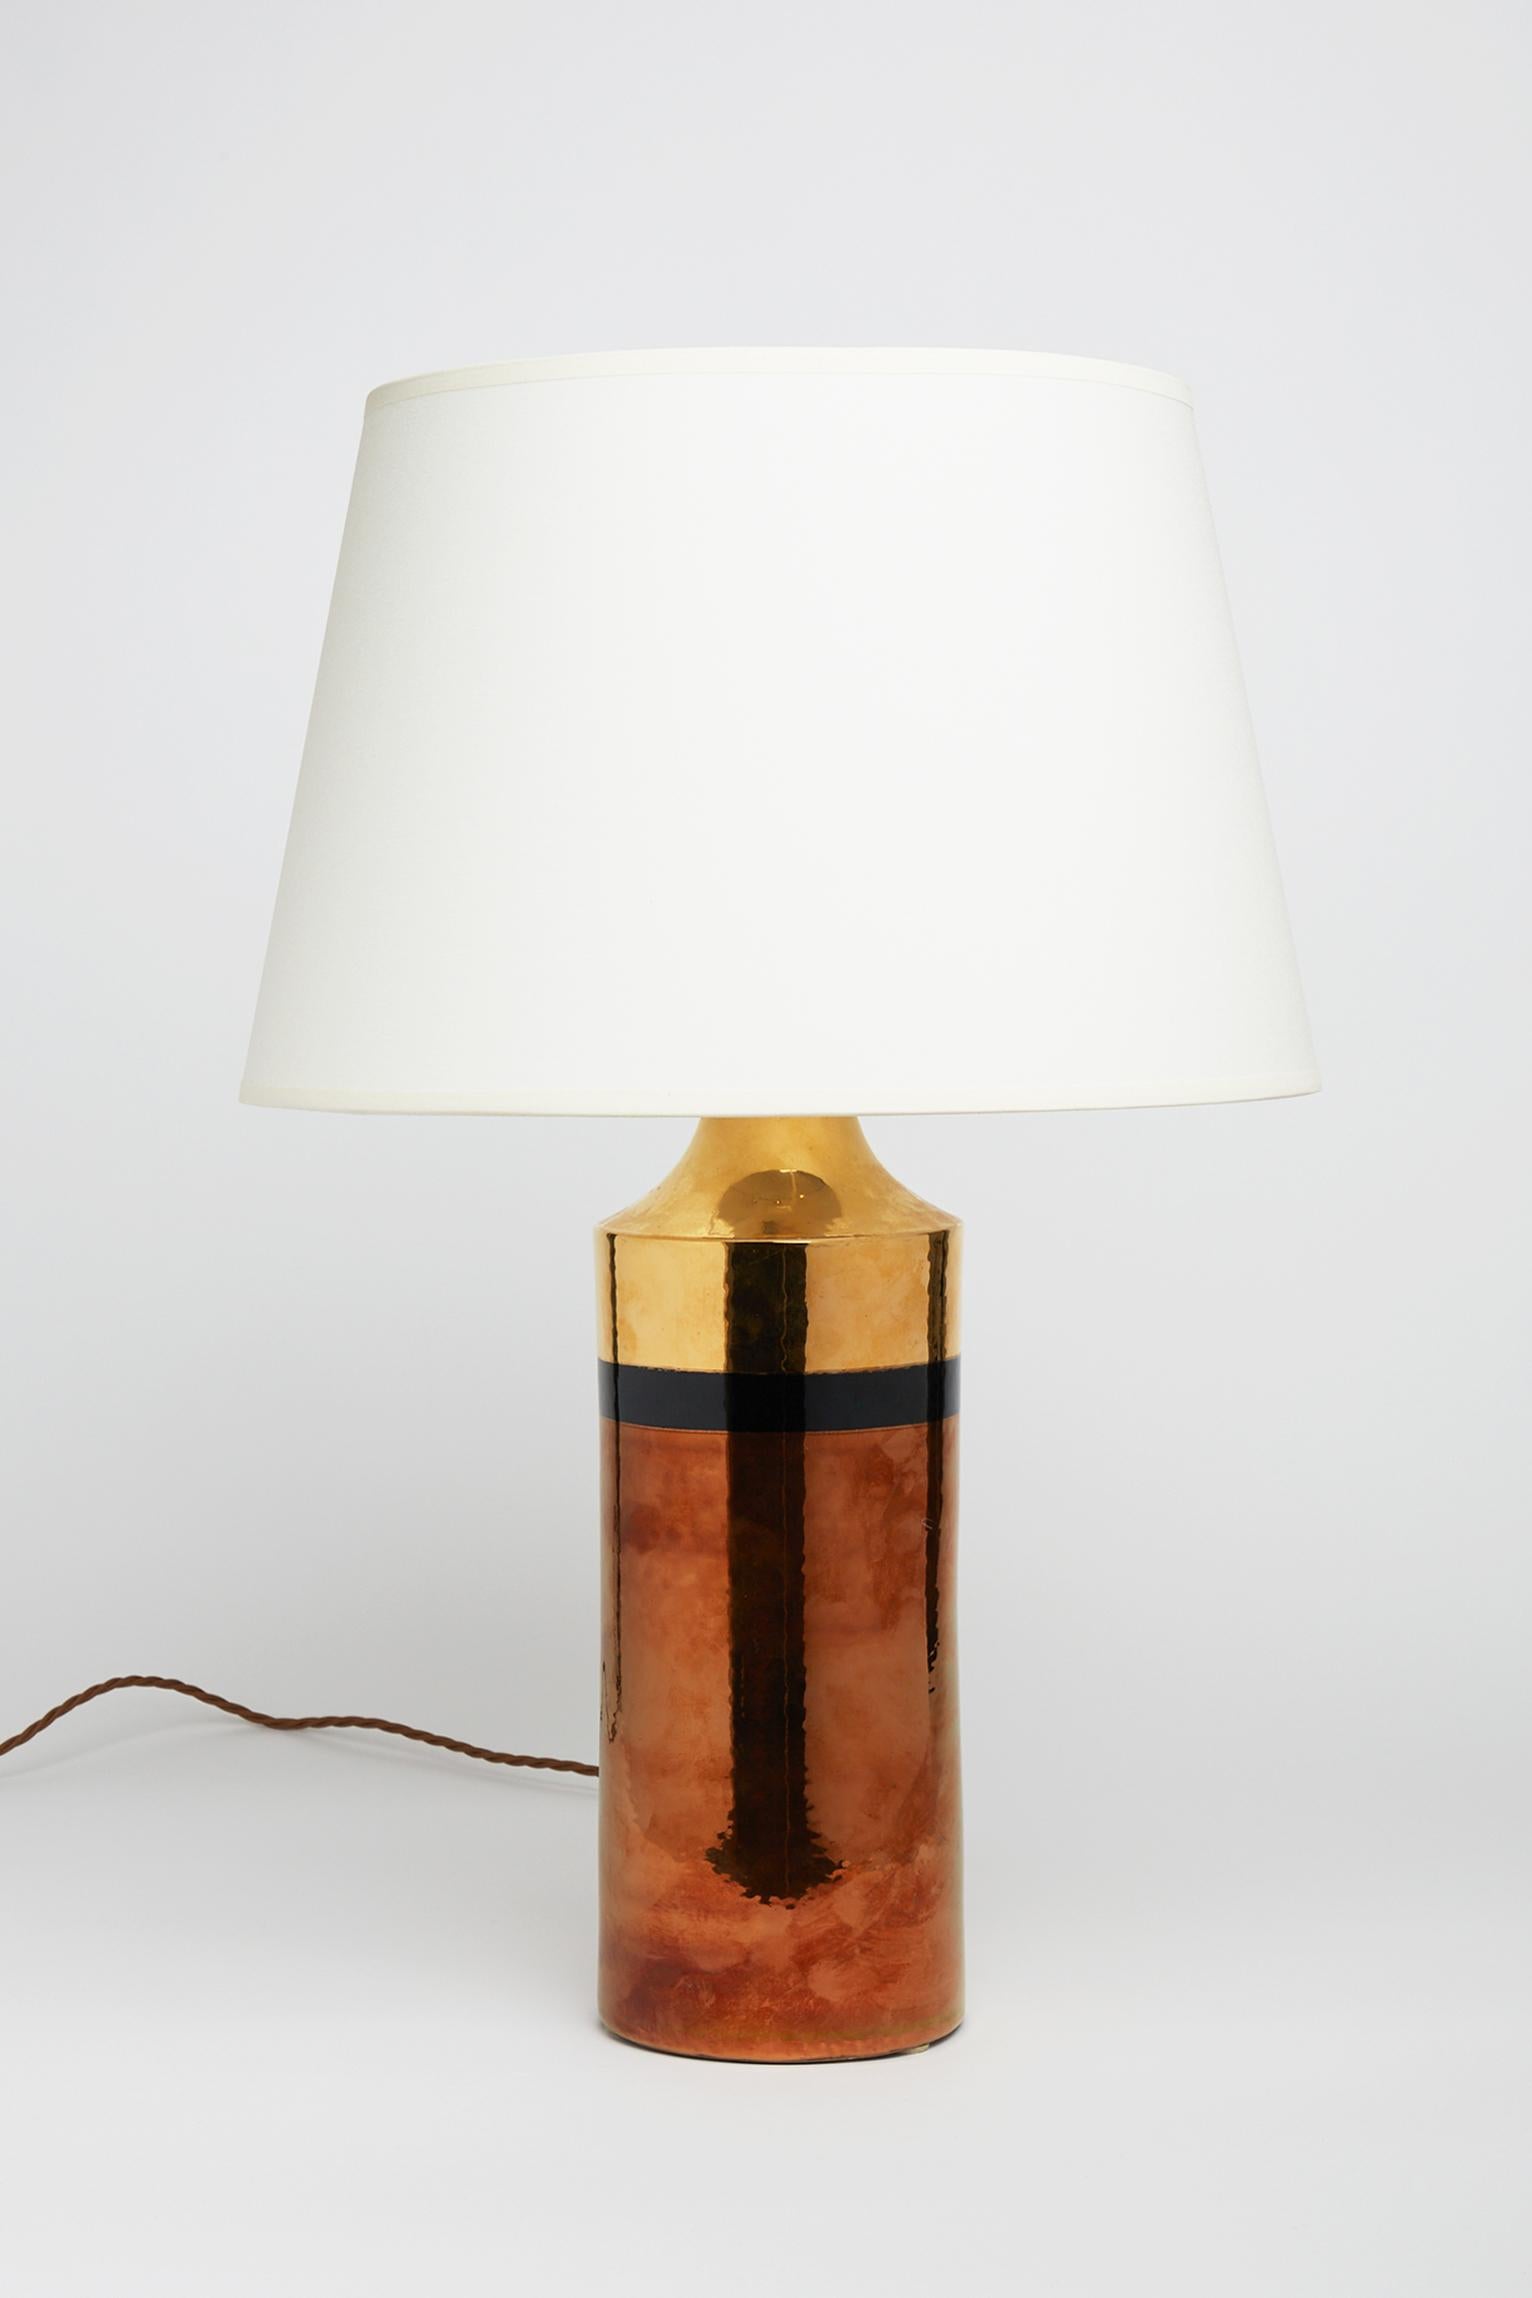 A pair of ceramic table lamps by Bergboms, with gold, bronze and copper glazes. Signed. 
Sweden, Circa 1970.
Measures: With the shade: 62 cm high by 40 cm diameter.
Lamp bases only: 42 cm high by 14 cm diameter.
 